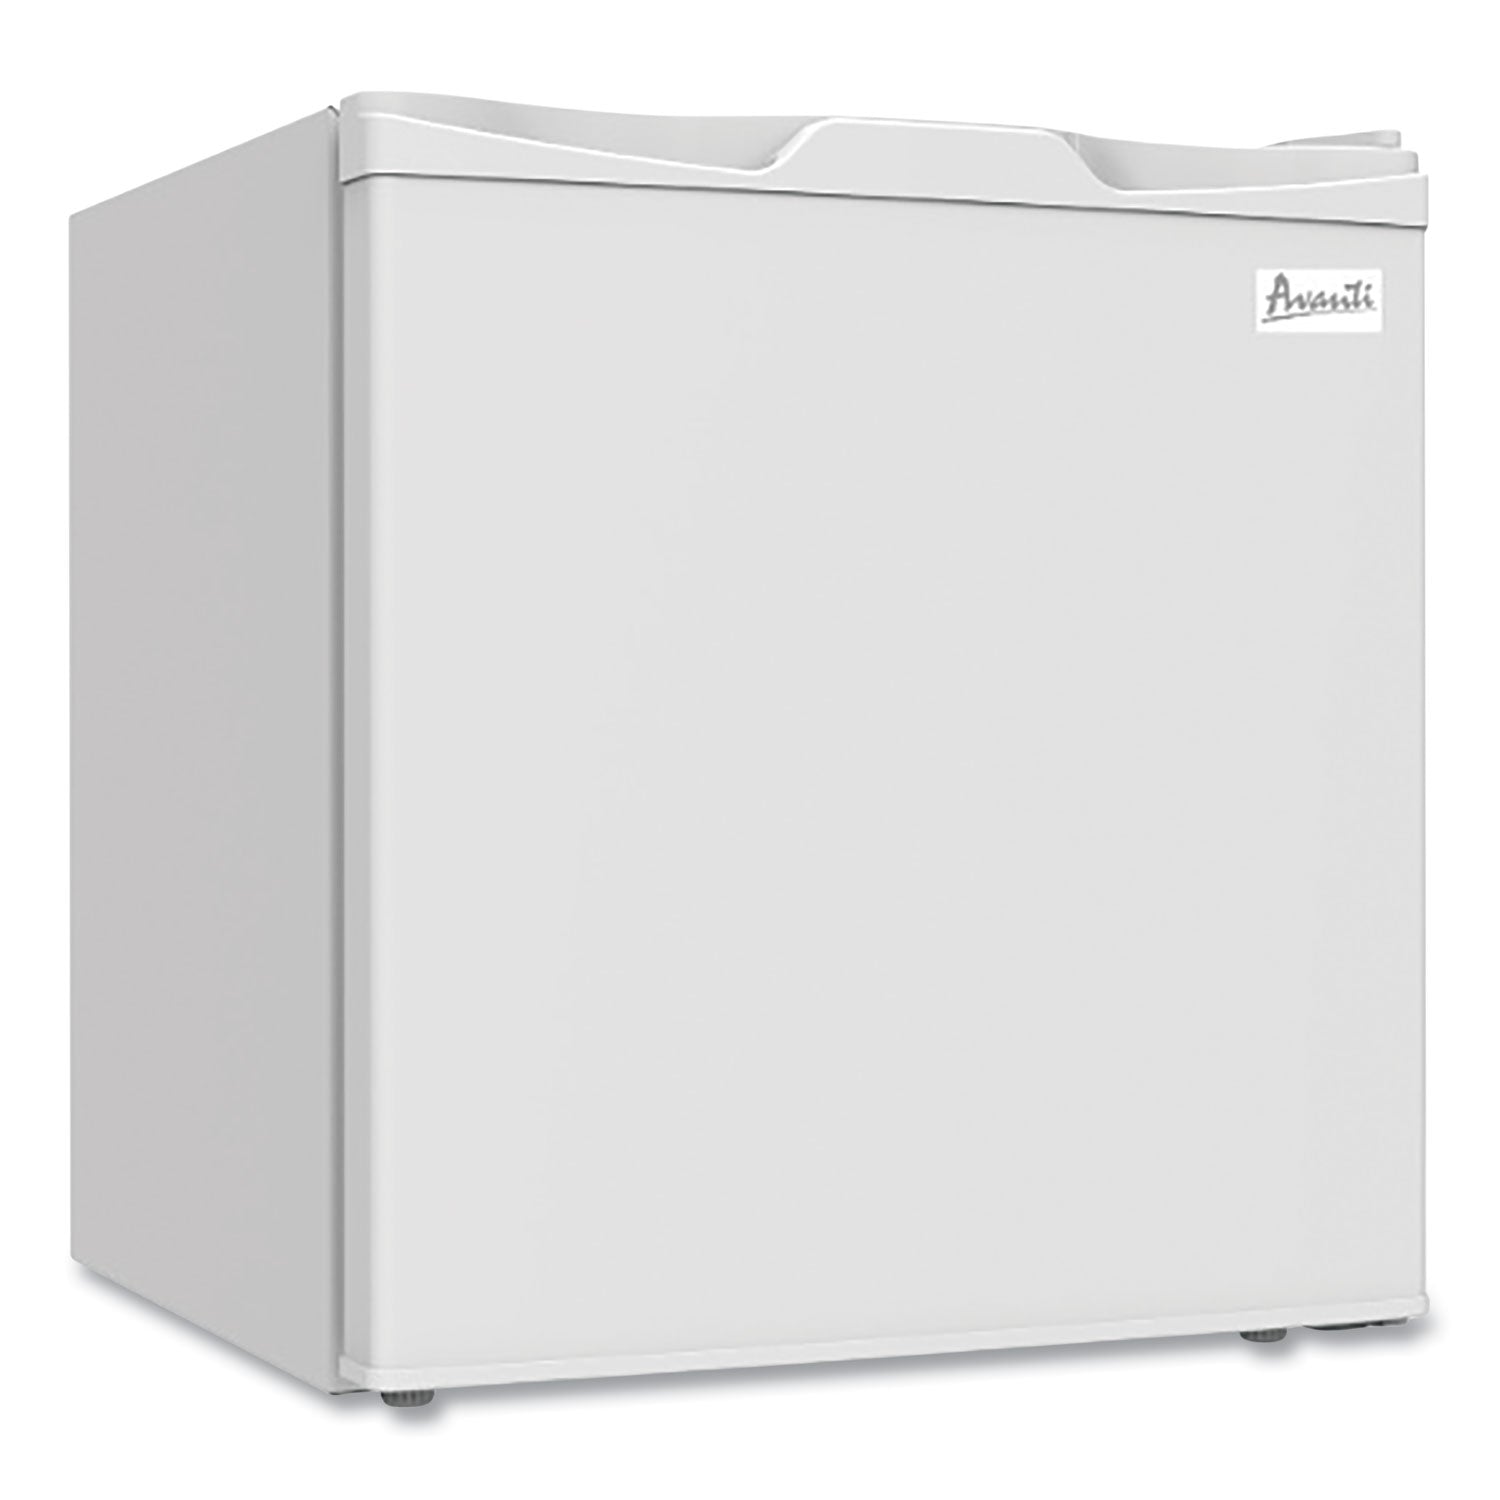 17-cubic-ft-compact-refrigerator-with-chiller-compartment-white_avarm16j0w17x0w - 1